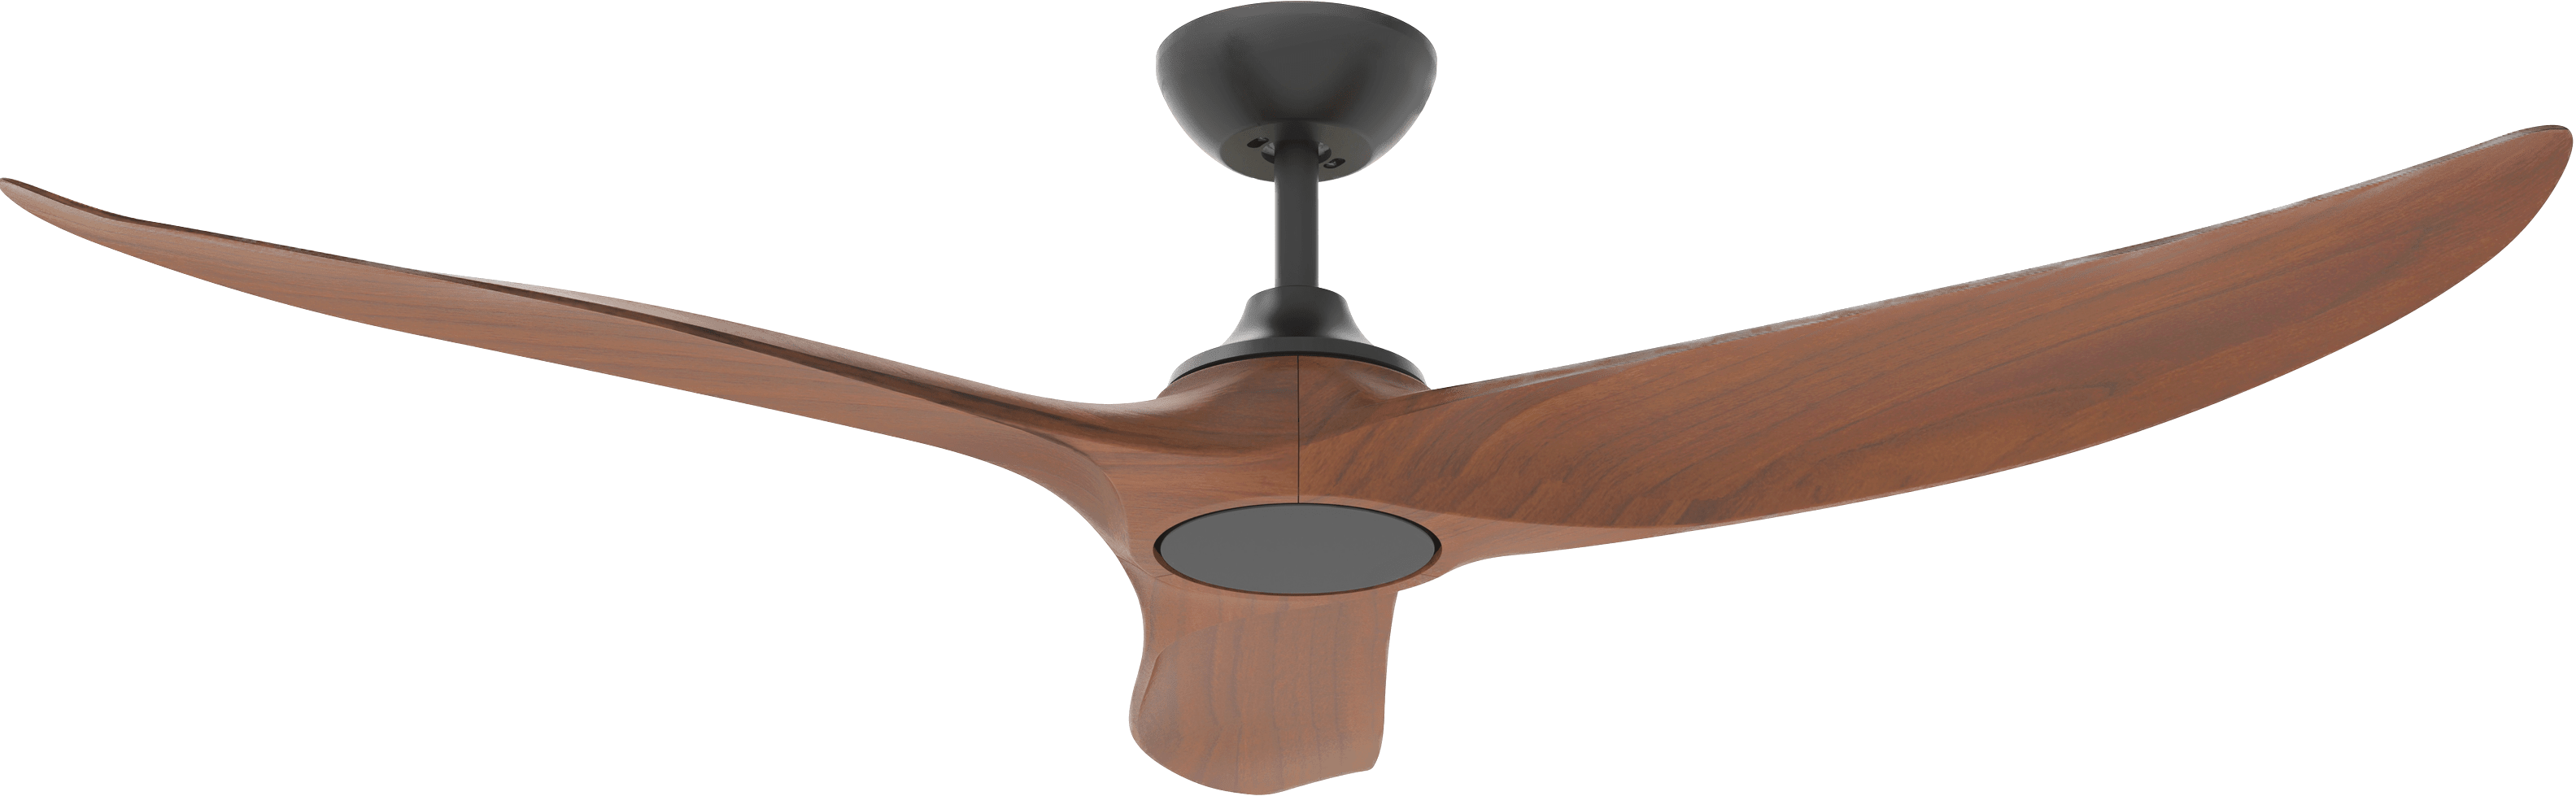 Hunter Pacific Ceiling Fans Black/Koa / 48" Evolve EC/DC Motor Ceiling Fan with Remote by Hunter Pacific Lights-For-You